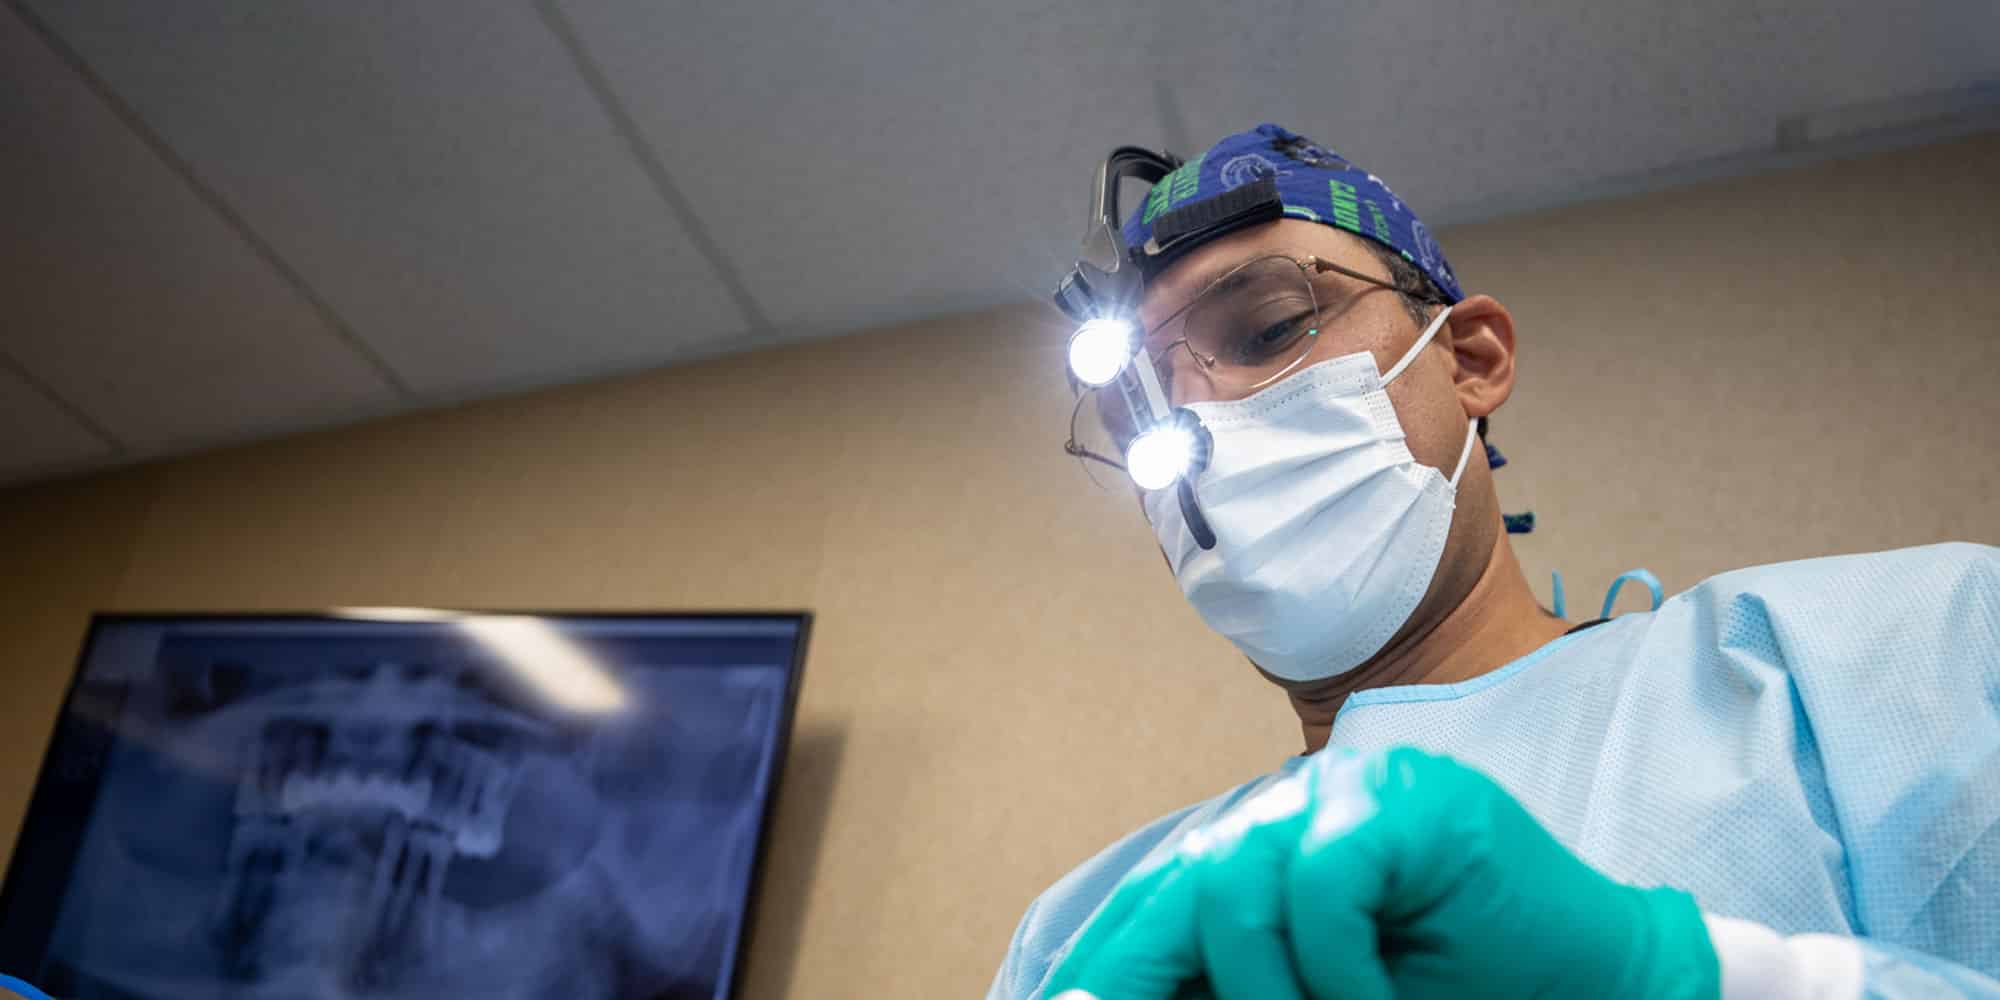 surgical gear on as dr bhullar performs dental procedure